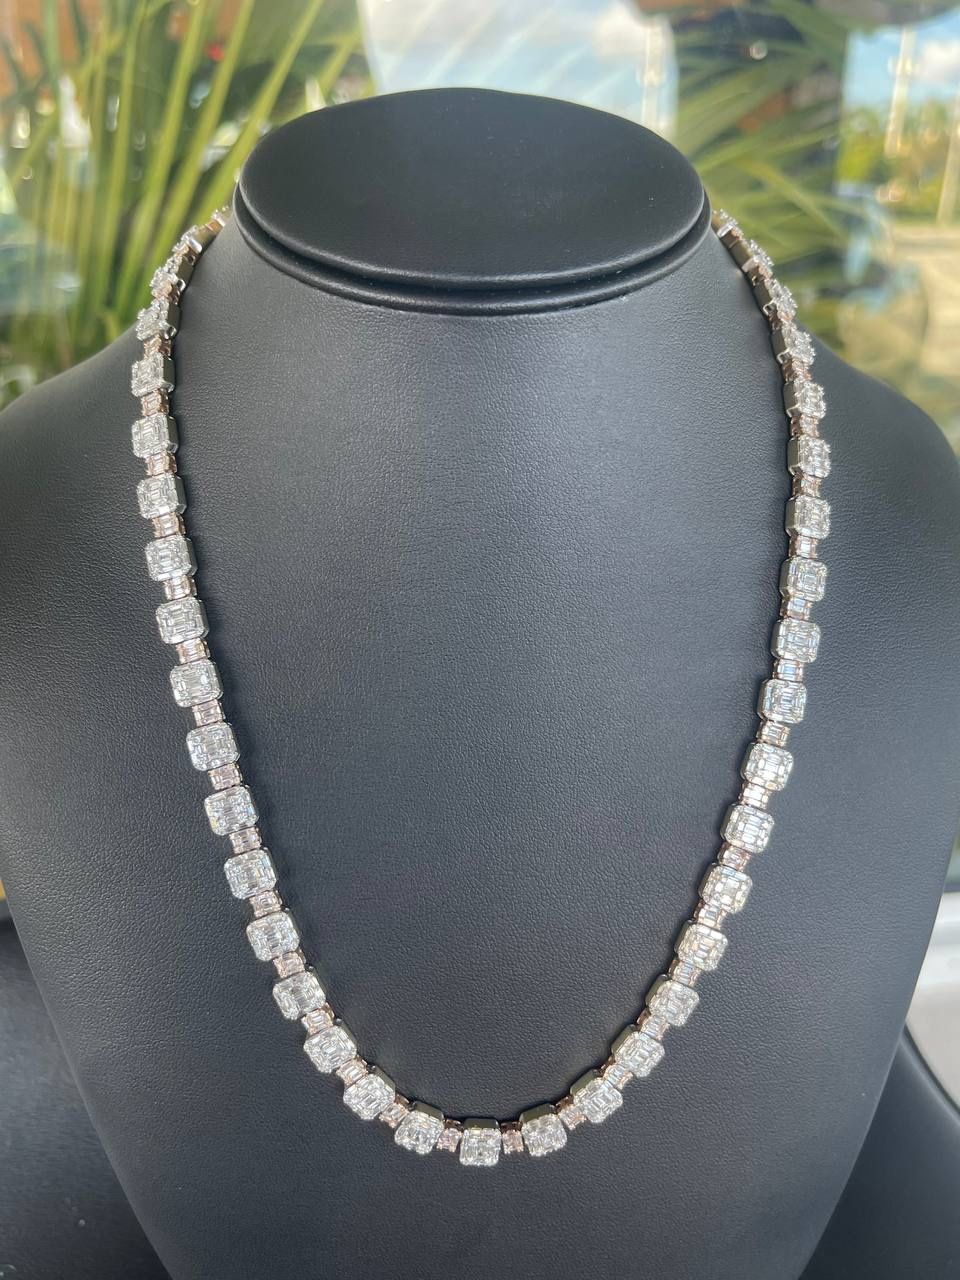 14k solid white and rose gold Chain